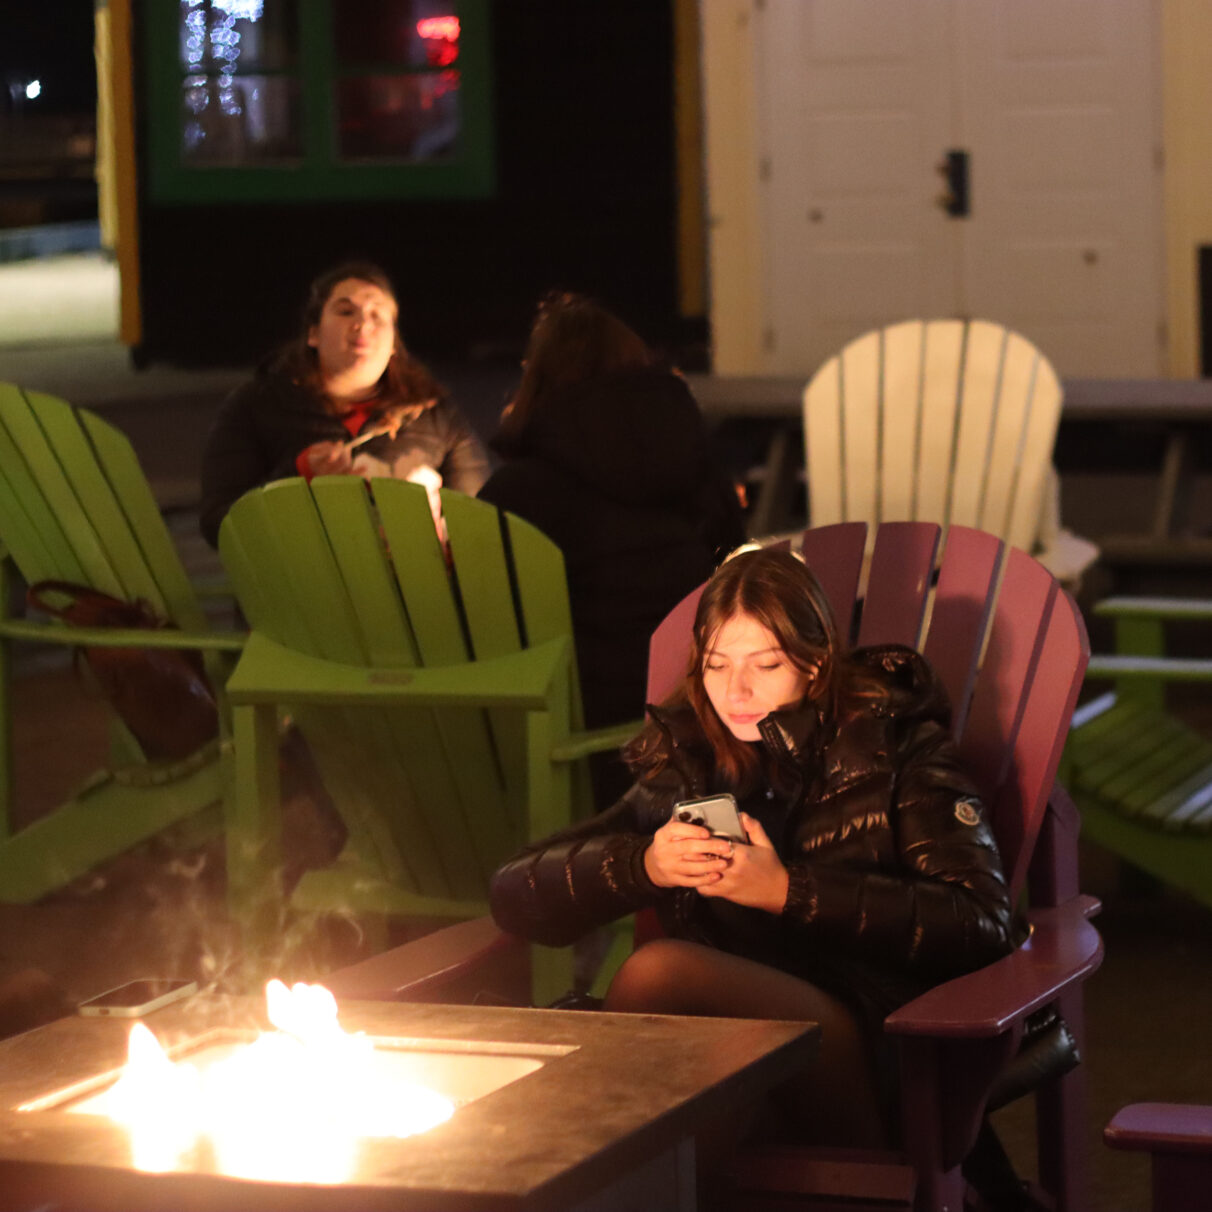 Girl sitting near a bonfire table looking at her phone.